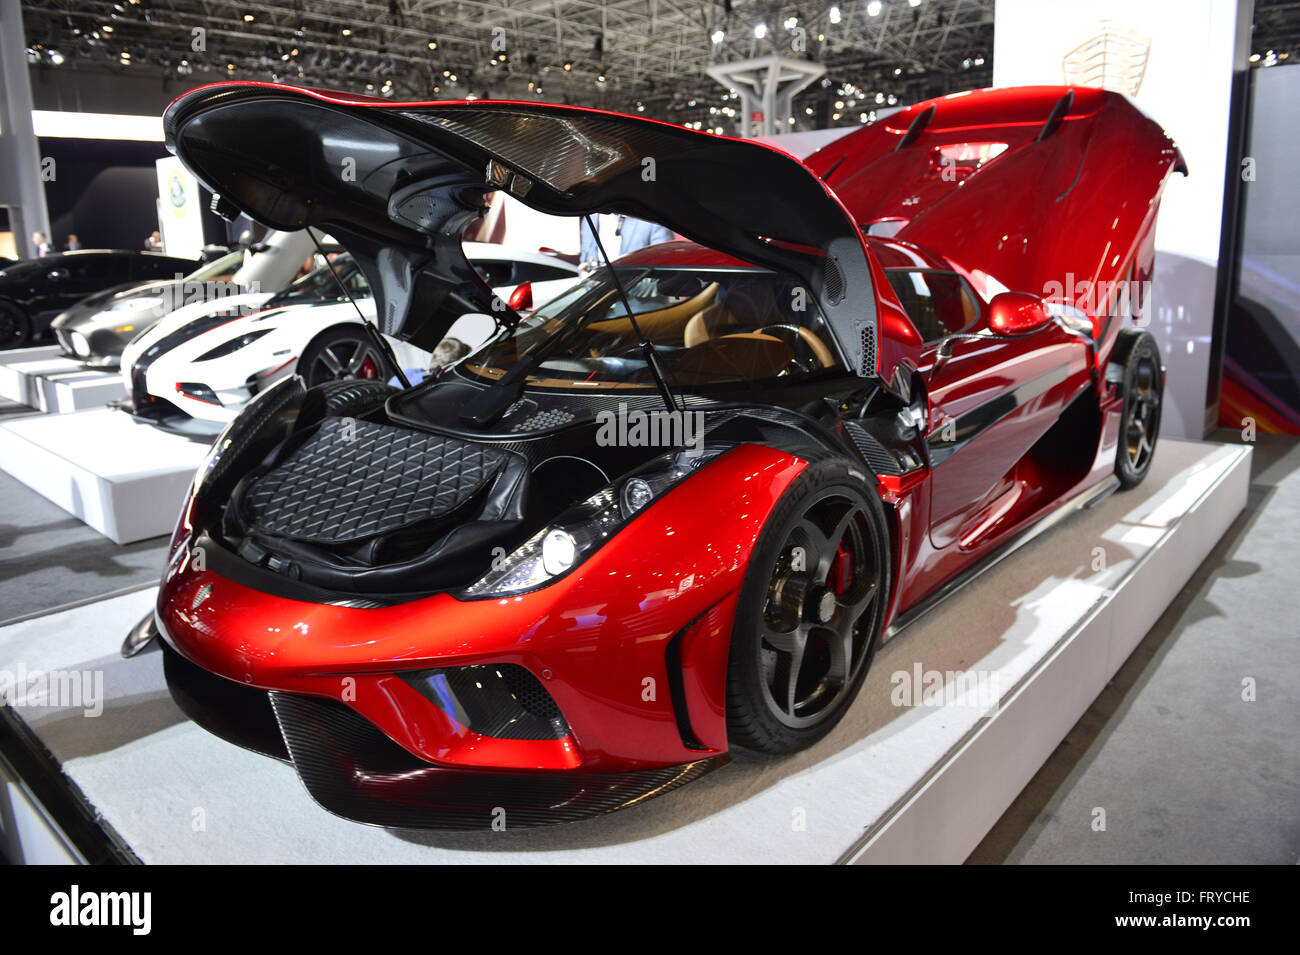 Manhattan, New York, USA. 23rd Mar, 2016. The Koenigsegg Regera, with red exterior and black interior and costs over 2 million dollars on road, is on display with open hood and trunk at the New York International Auto Show 2016, at the Jacob Javits Center. Thirty of these cars have been sold, and Regera means ''to reign'' in Swedish. This was Press Preview Day one of NYIAS, and the Trade Show will be open to the public for ten days, March 25th through April 3rd. © Ann Parry/ZUMA Wire/Alamy Live News Stock Photo